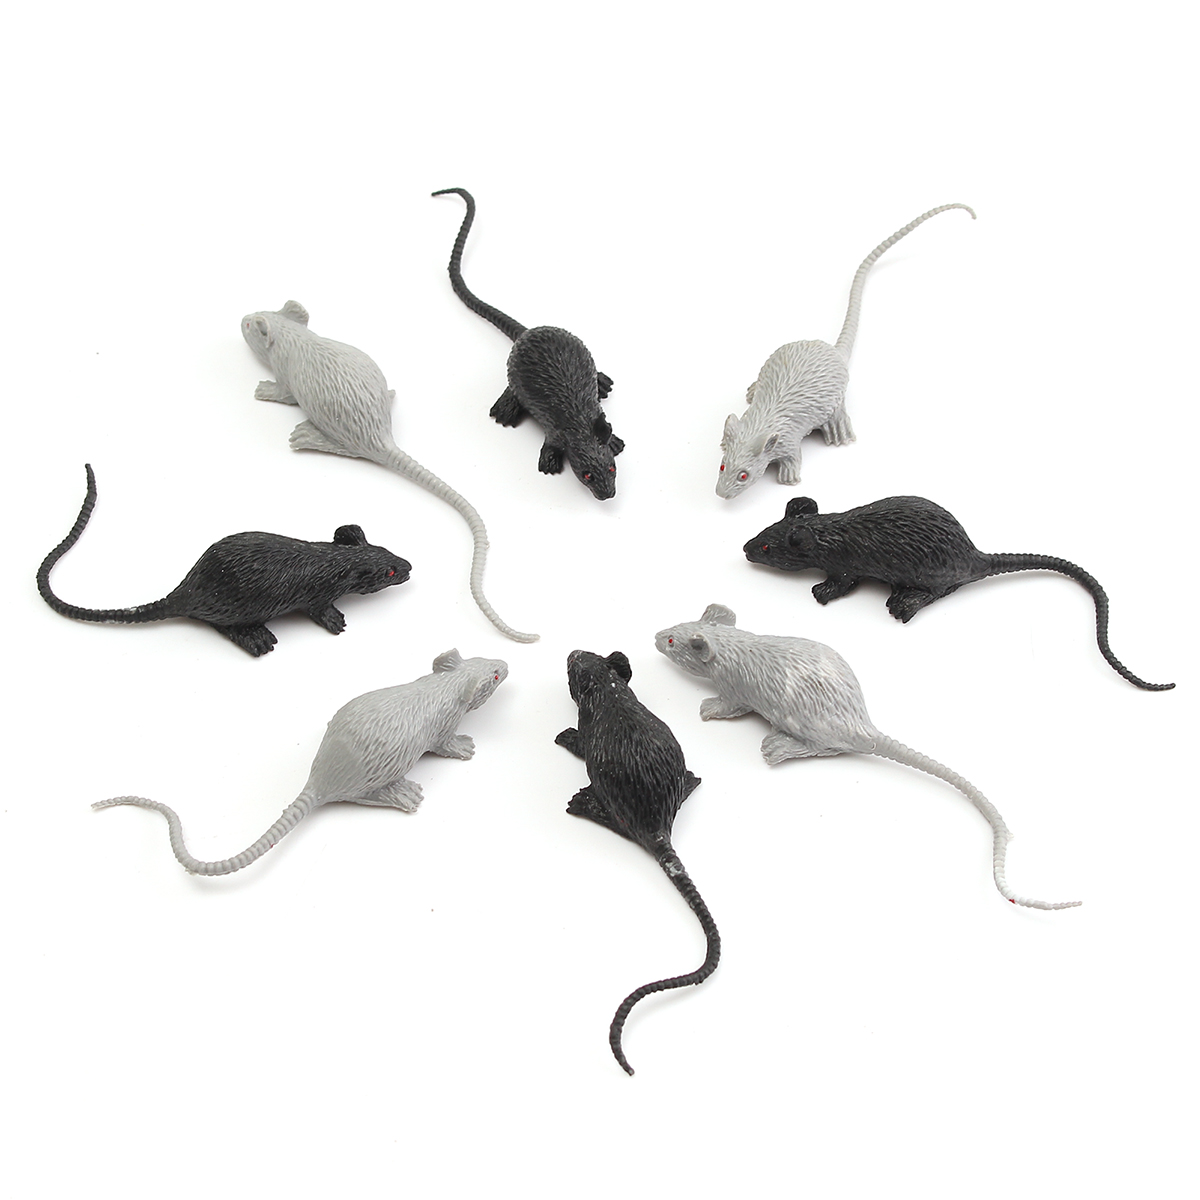 

8X Funny Pet Cat Kitten Play Playing Toy False Mouse Rat Squeak Noise Sound Gift